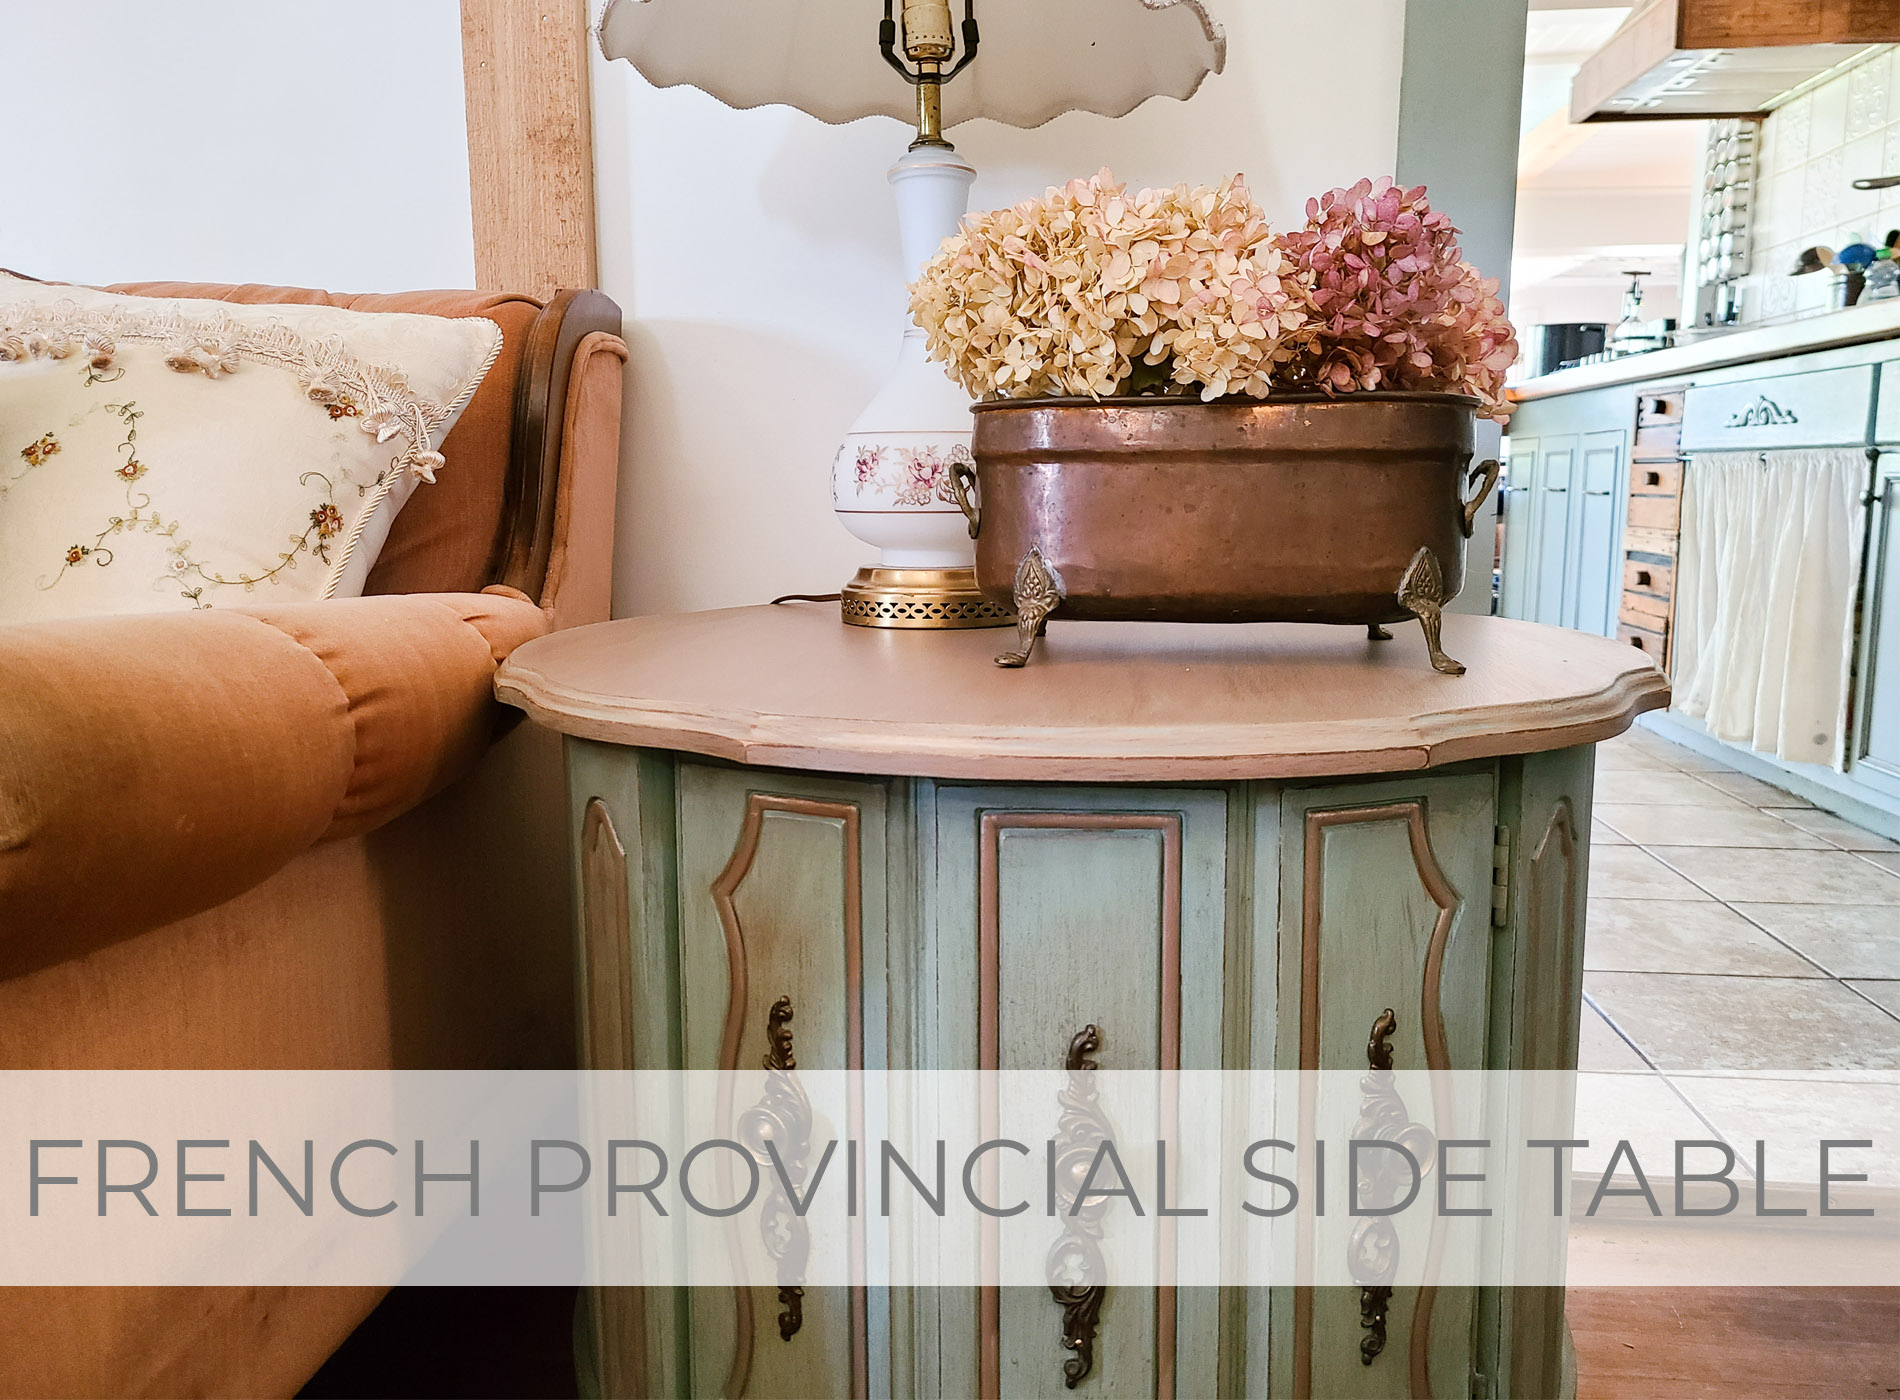 Vintage French Provincial Side Table Makeover | prodigalpieces.com #prodigalpieces